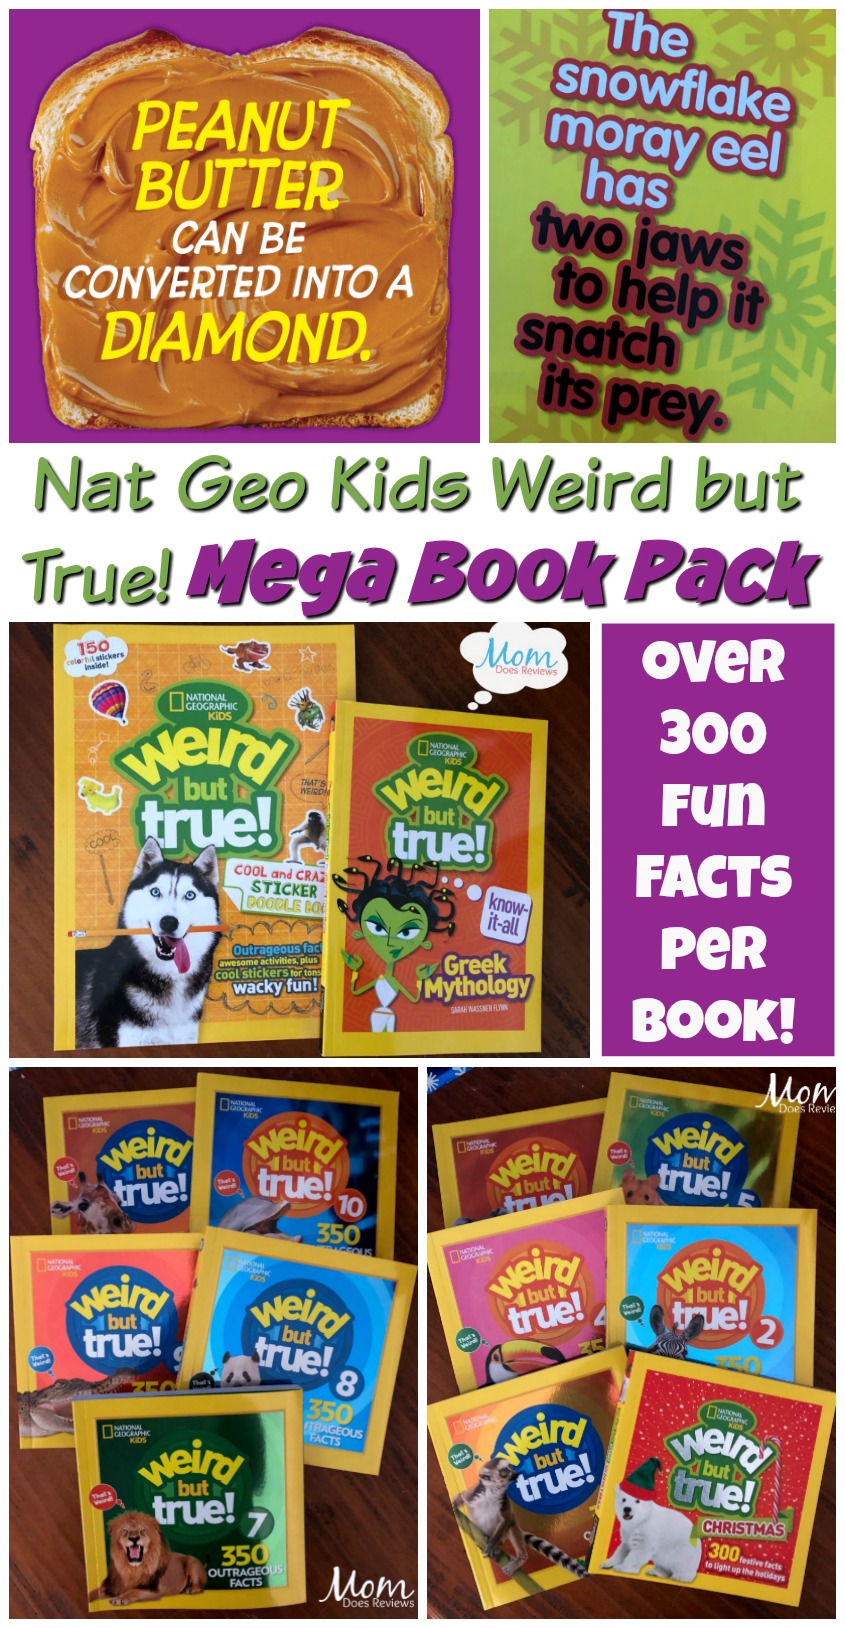 National Geographic Kids Weird But True! Mega Book Pack #MegaChristmas18 #books #facts #didyouknow